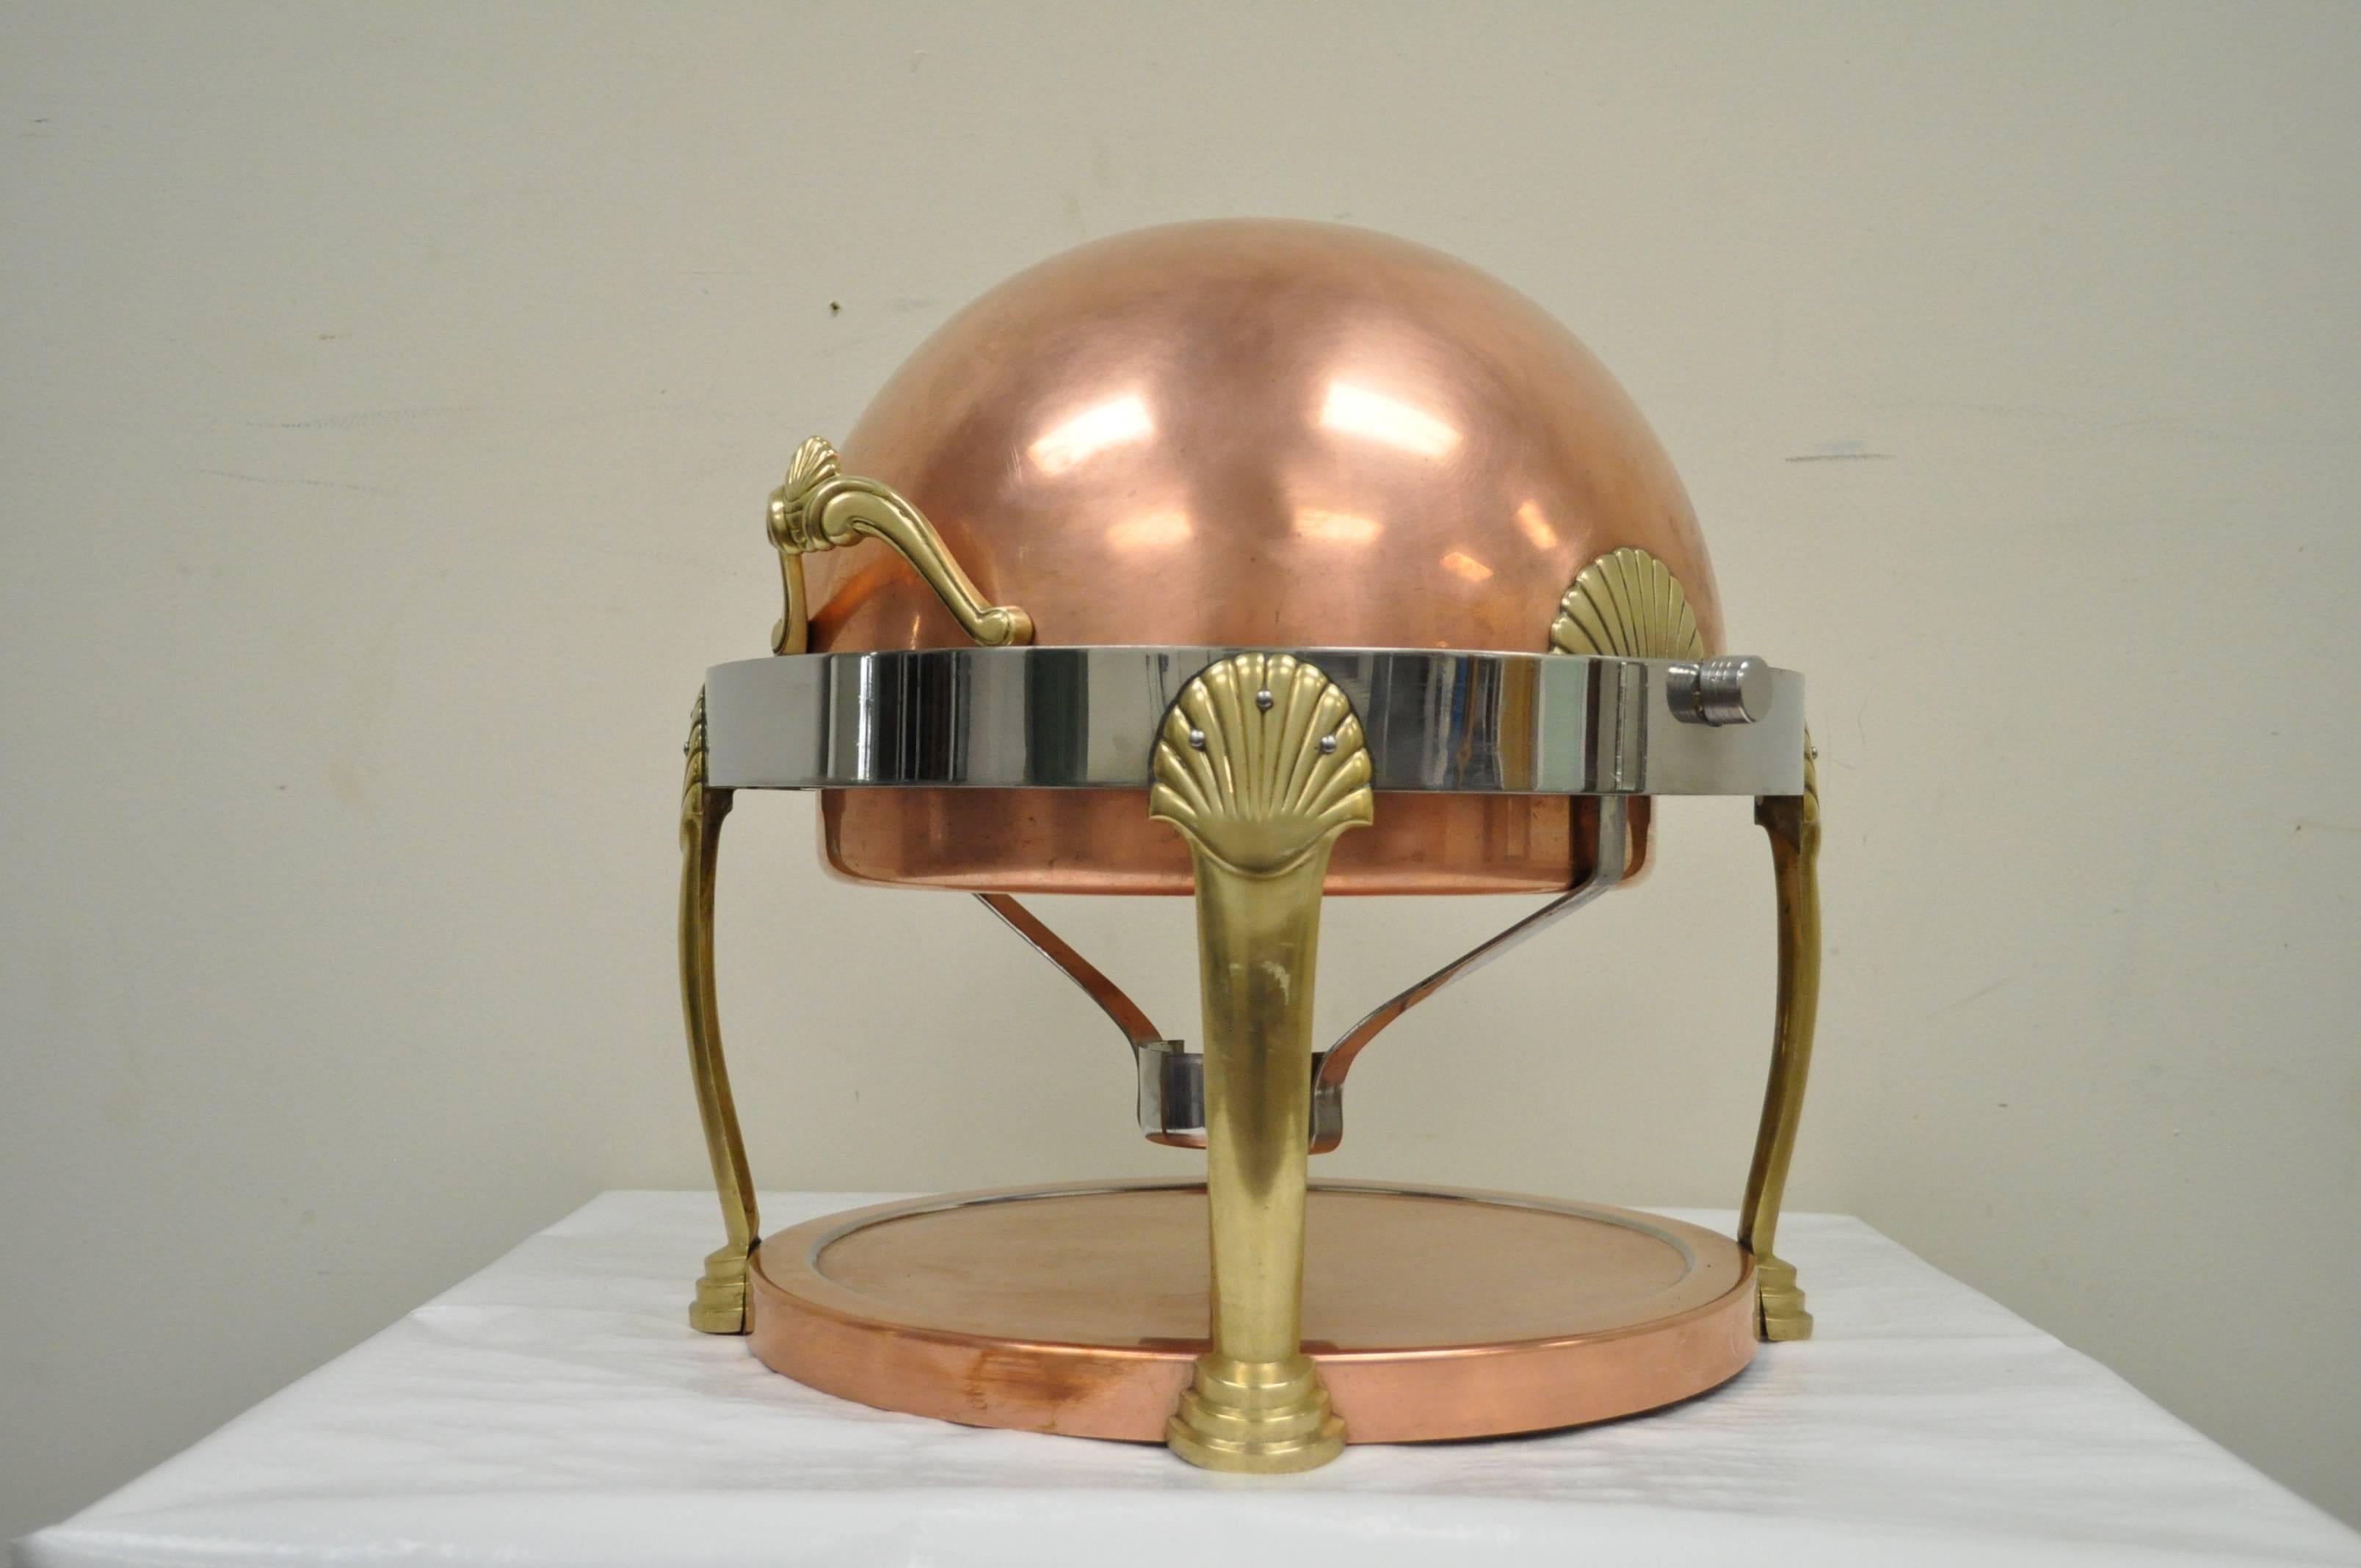 High quality vintage chafer in solid brass, copper, and chromed steel. Item features shell form accents, domed top, and great form. 